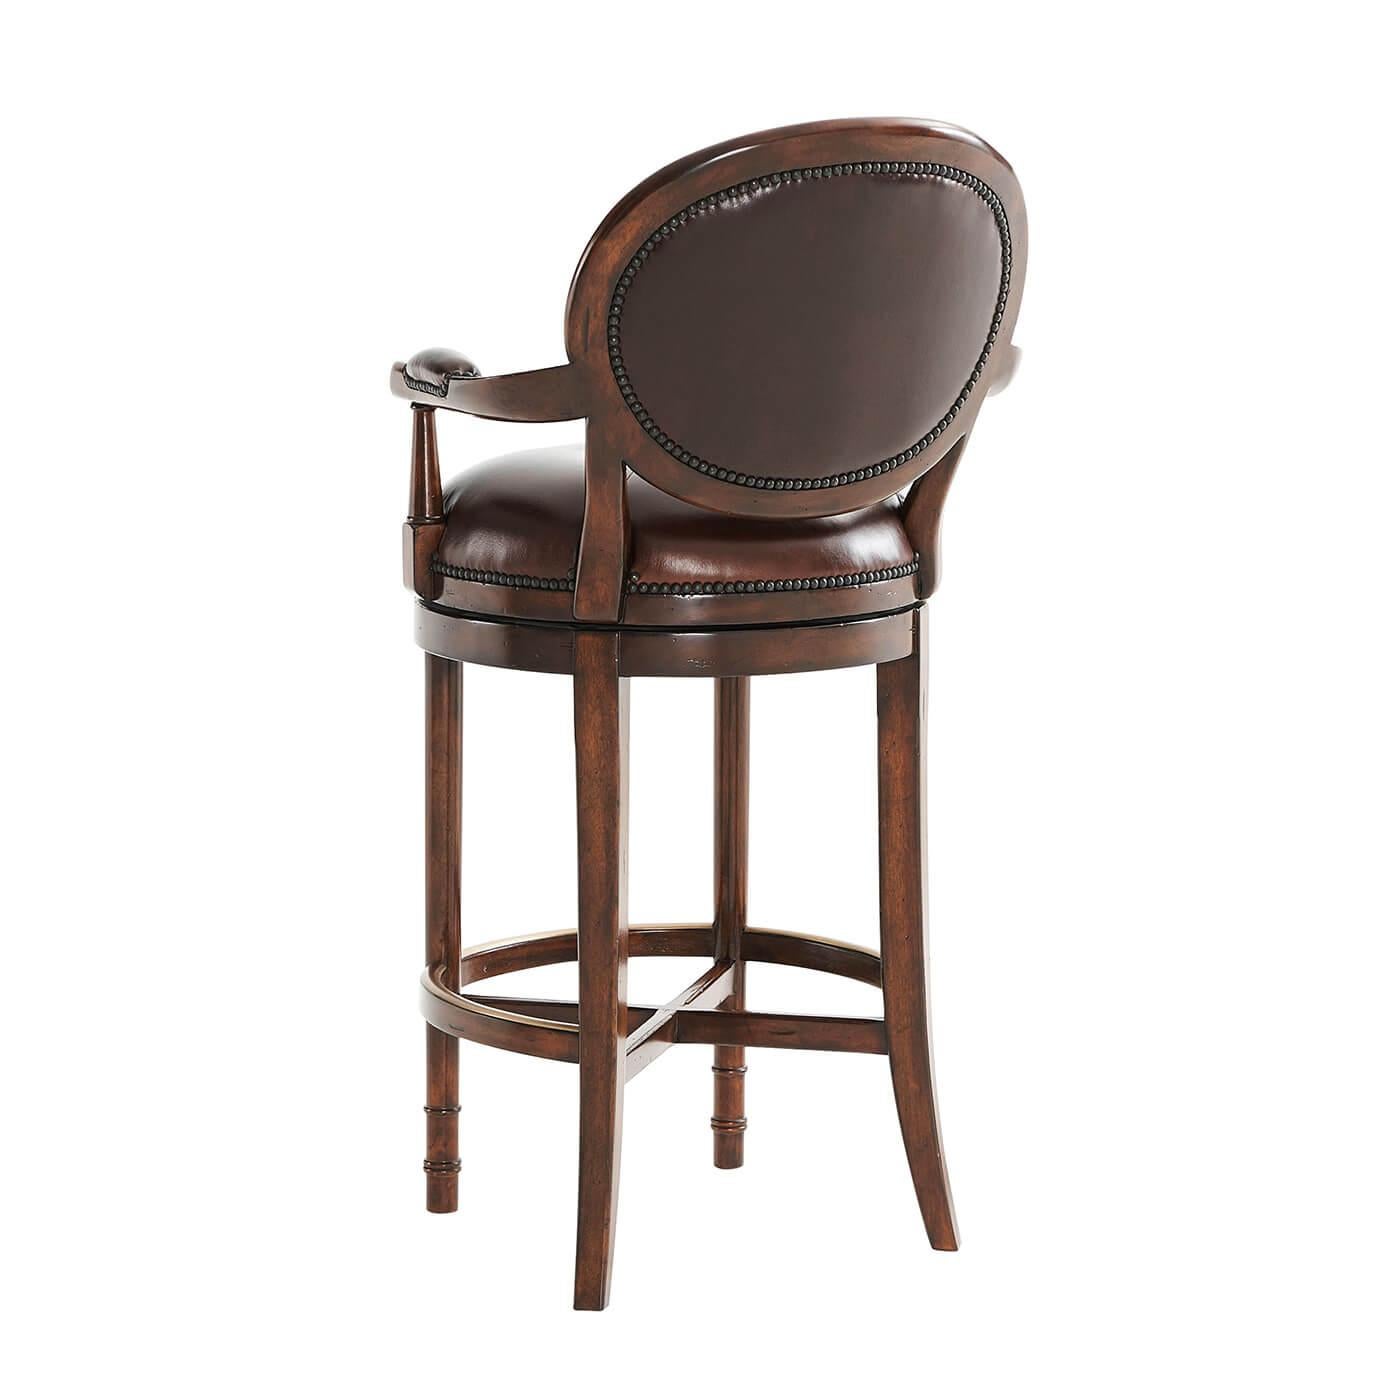 An Italian neoclassic bar stool, with a leather upholstered oval padded back and circular swivel seat, on turned legs, joined by an 